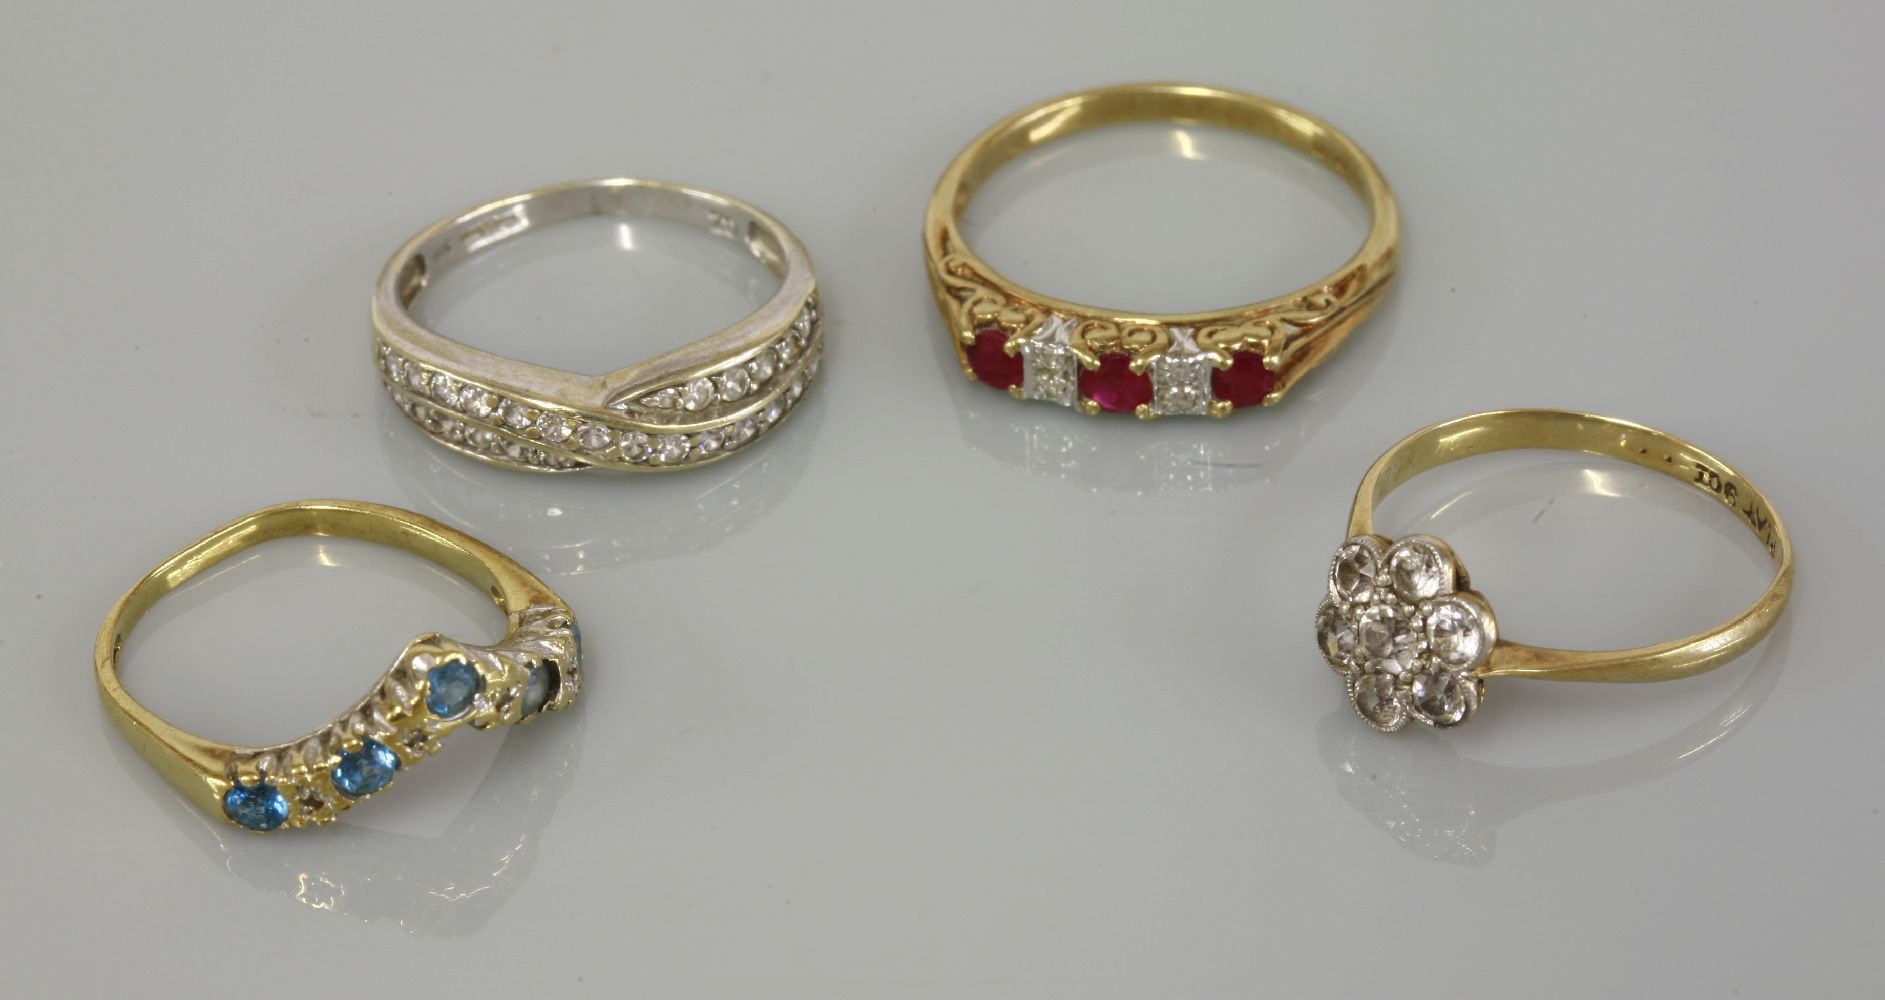 A 9ct gold three stone ruby ring, with pairs of diamond set points, a 9ct gold blue topaz and